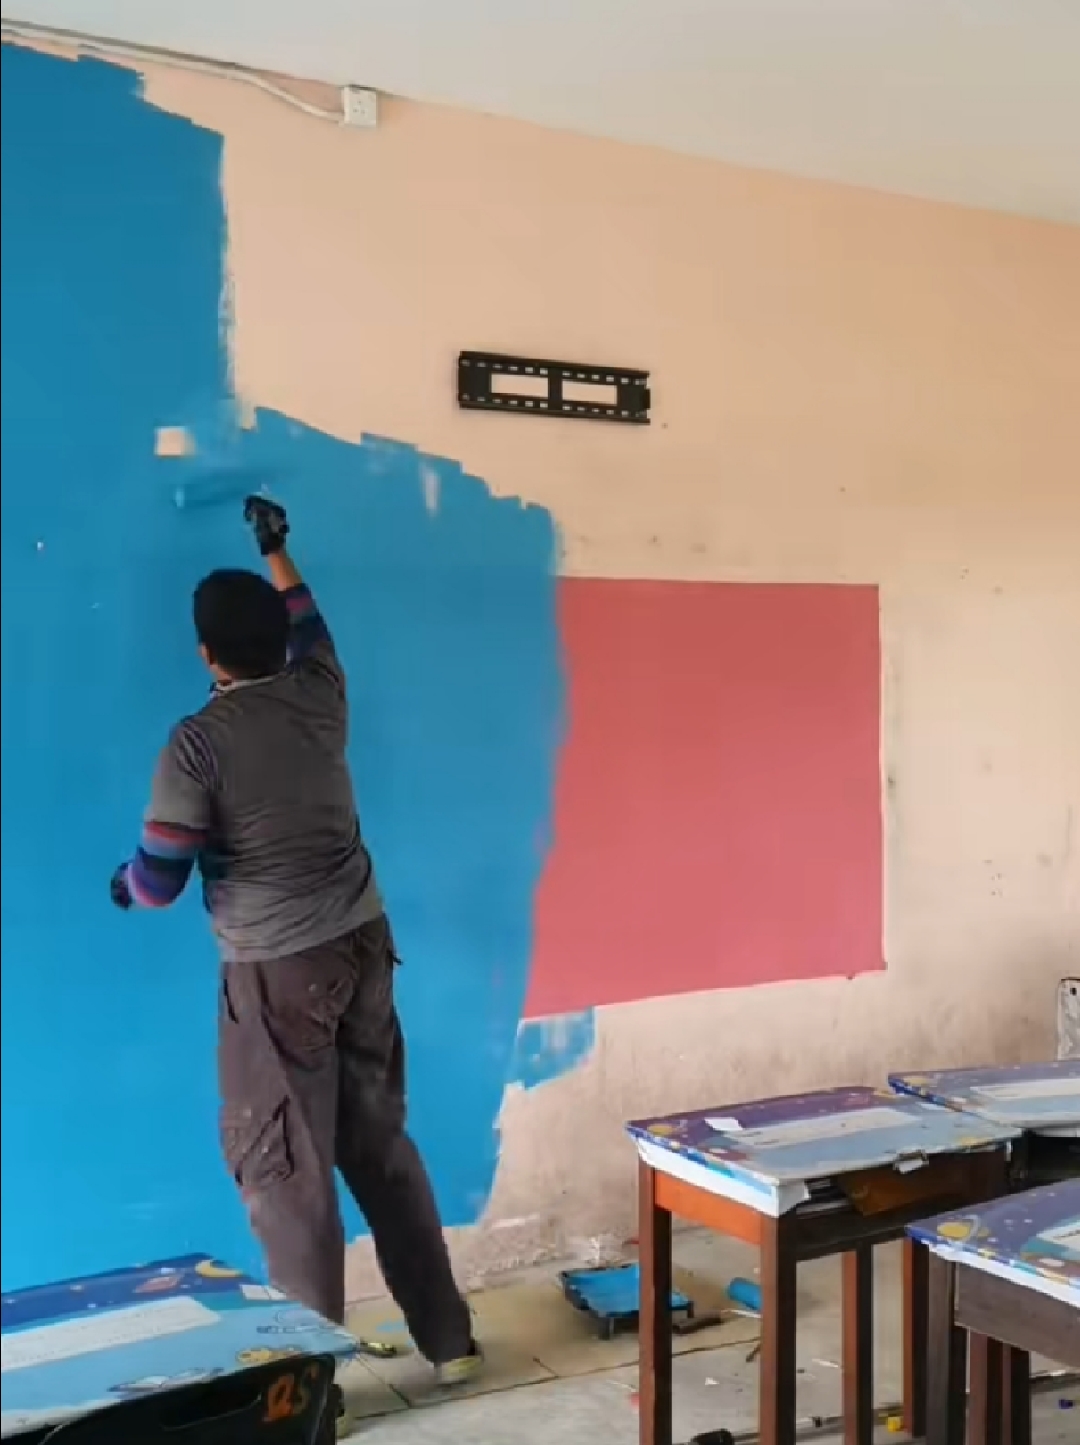 M'sian teacher transforms classroom by painting & decorating the class, wins approval on tiktok | weirdkaya